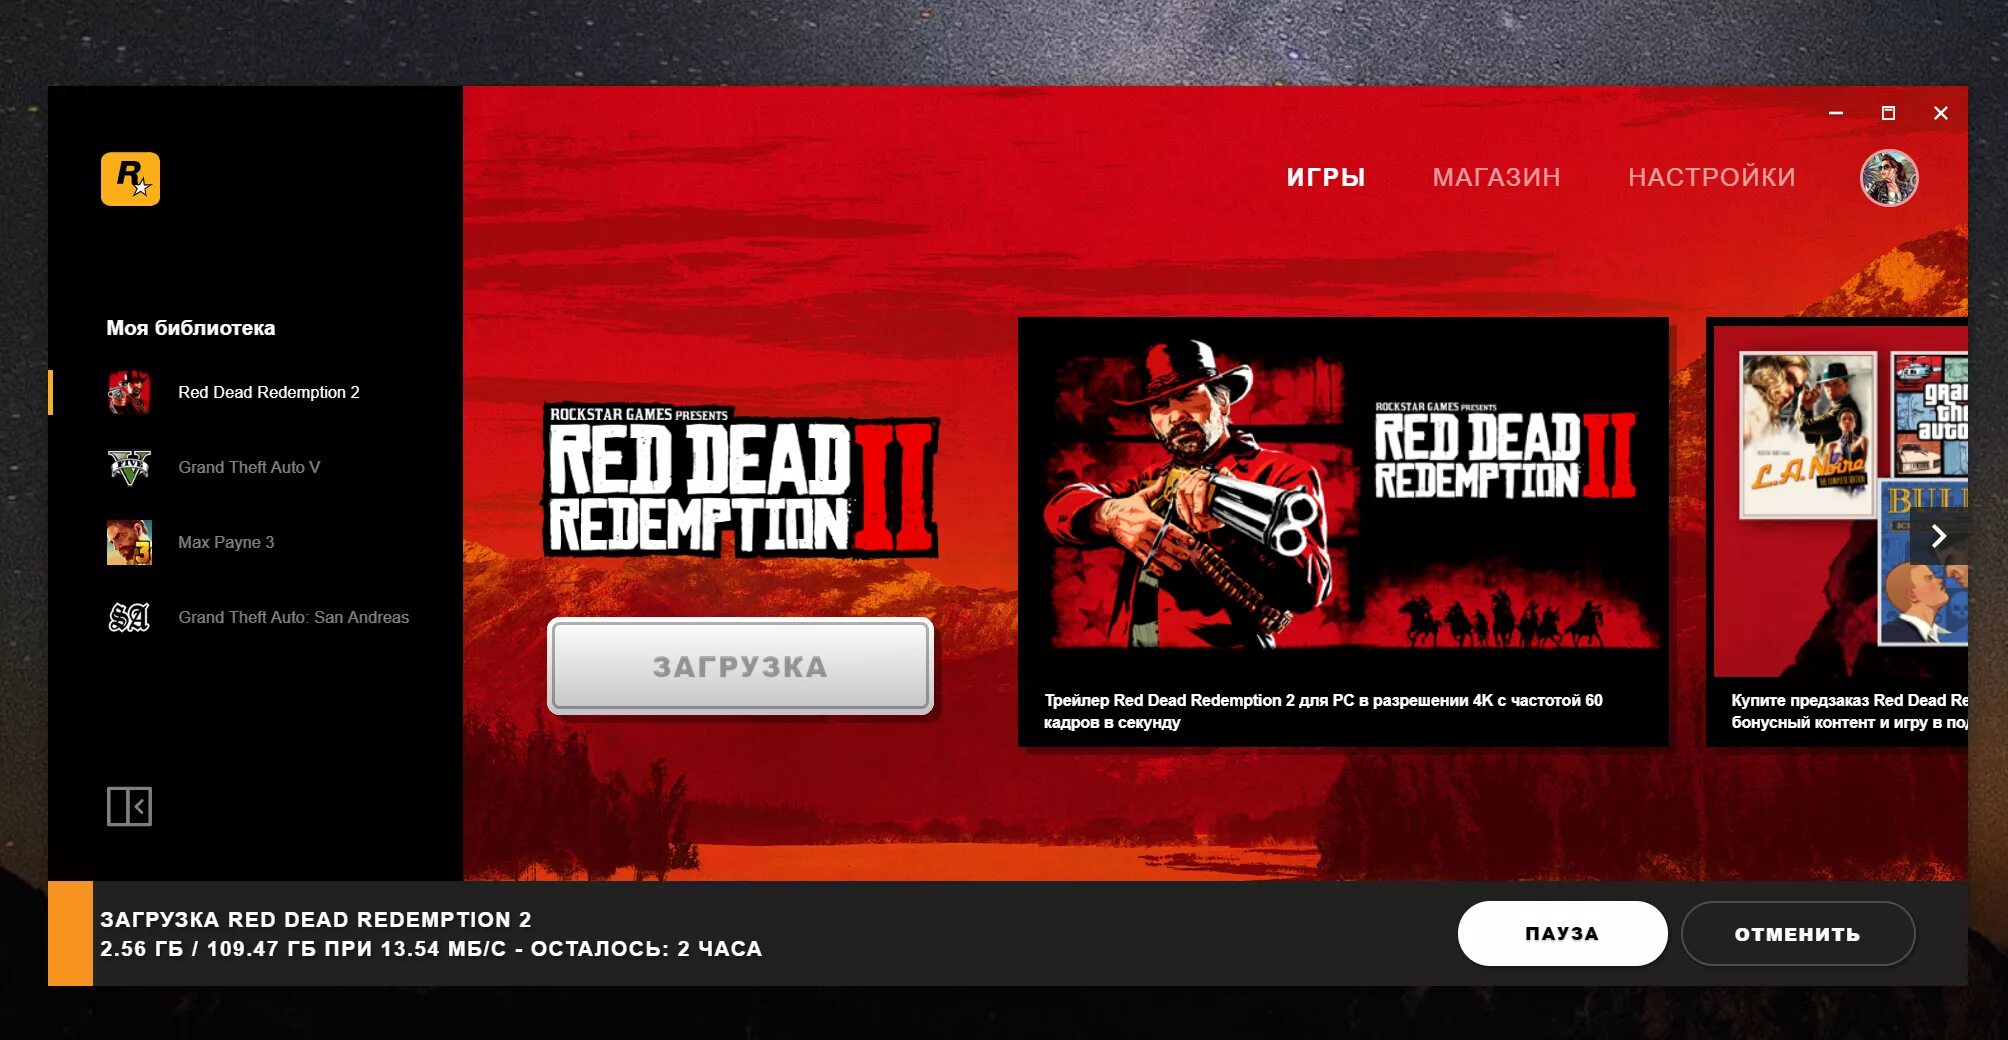 Red Dead Redemption 2: Ultimate Edition. Red Dead Redemption 2 PC версия. Рокстар РДР 2. Red Dead Redemption 1 системные требования. Red dead redemption системные требования для пк